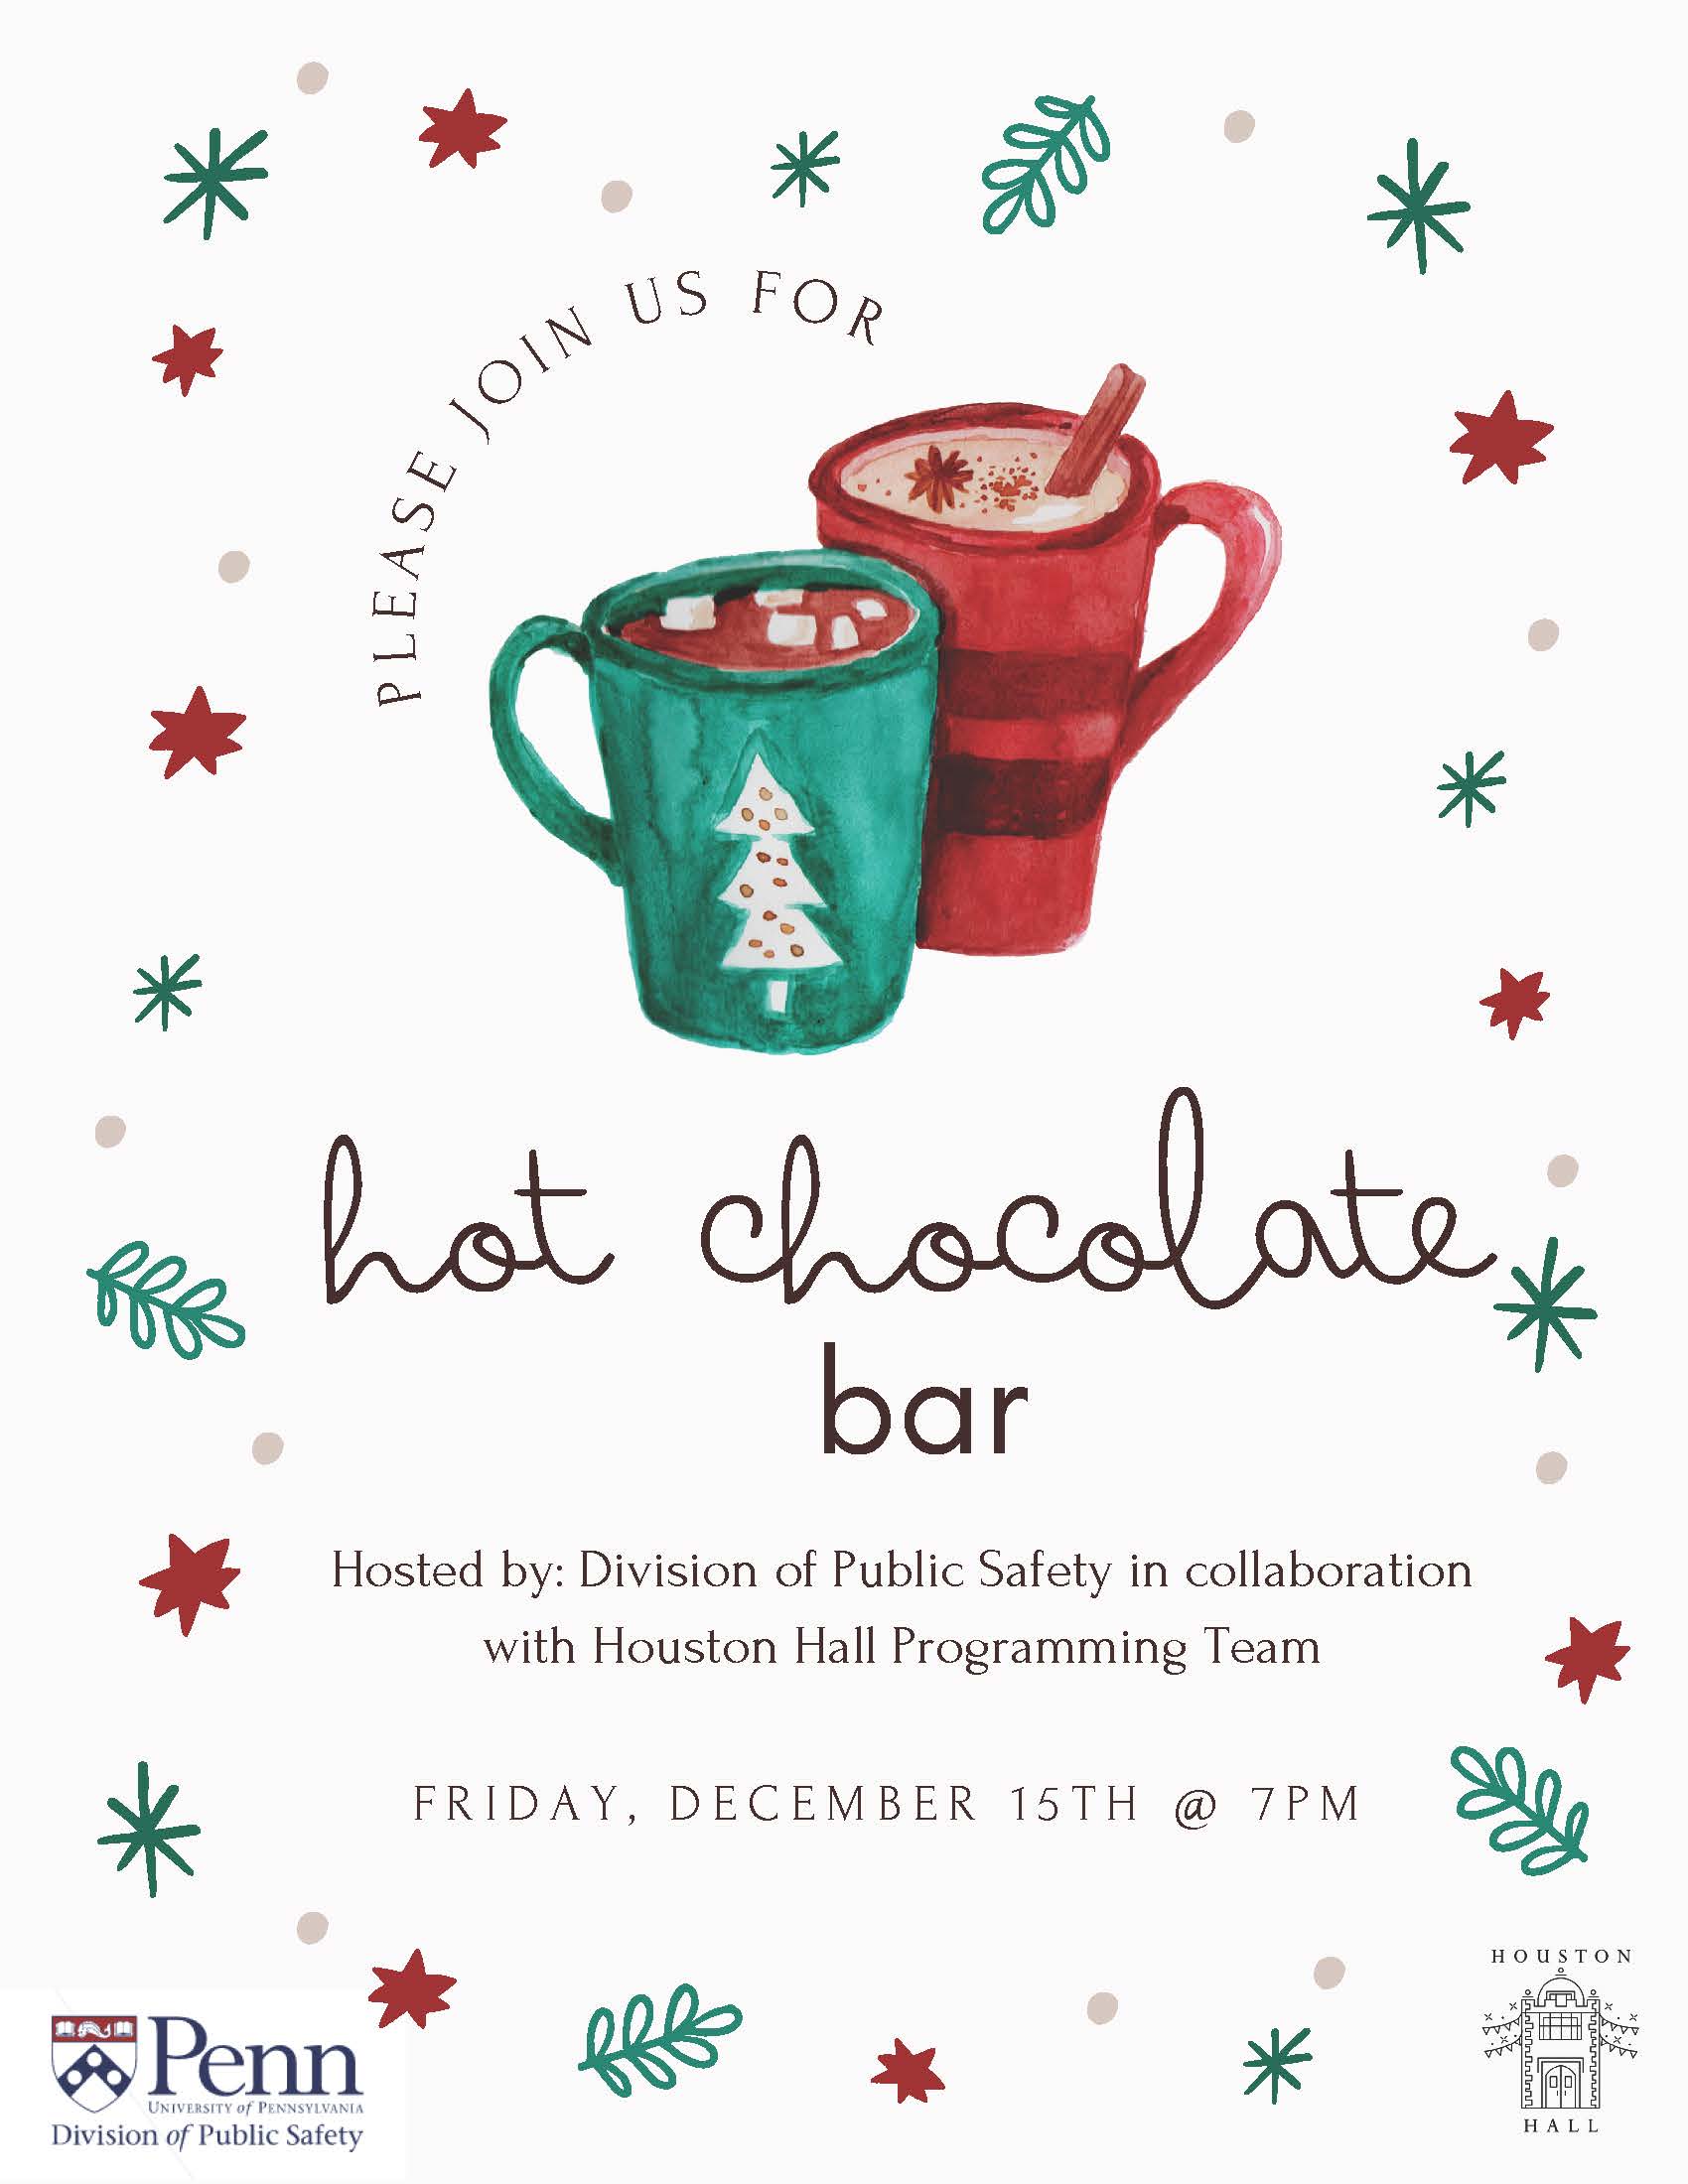 Graphic of two mugs of hot chocolate and stars and tree decorations. Text: Hot Chocolate Bar hosted by Division of Public Safety in collaboration with Houston Hall Programming Team. Friday December 15th at 7pm.